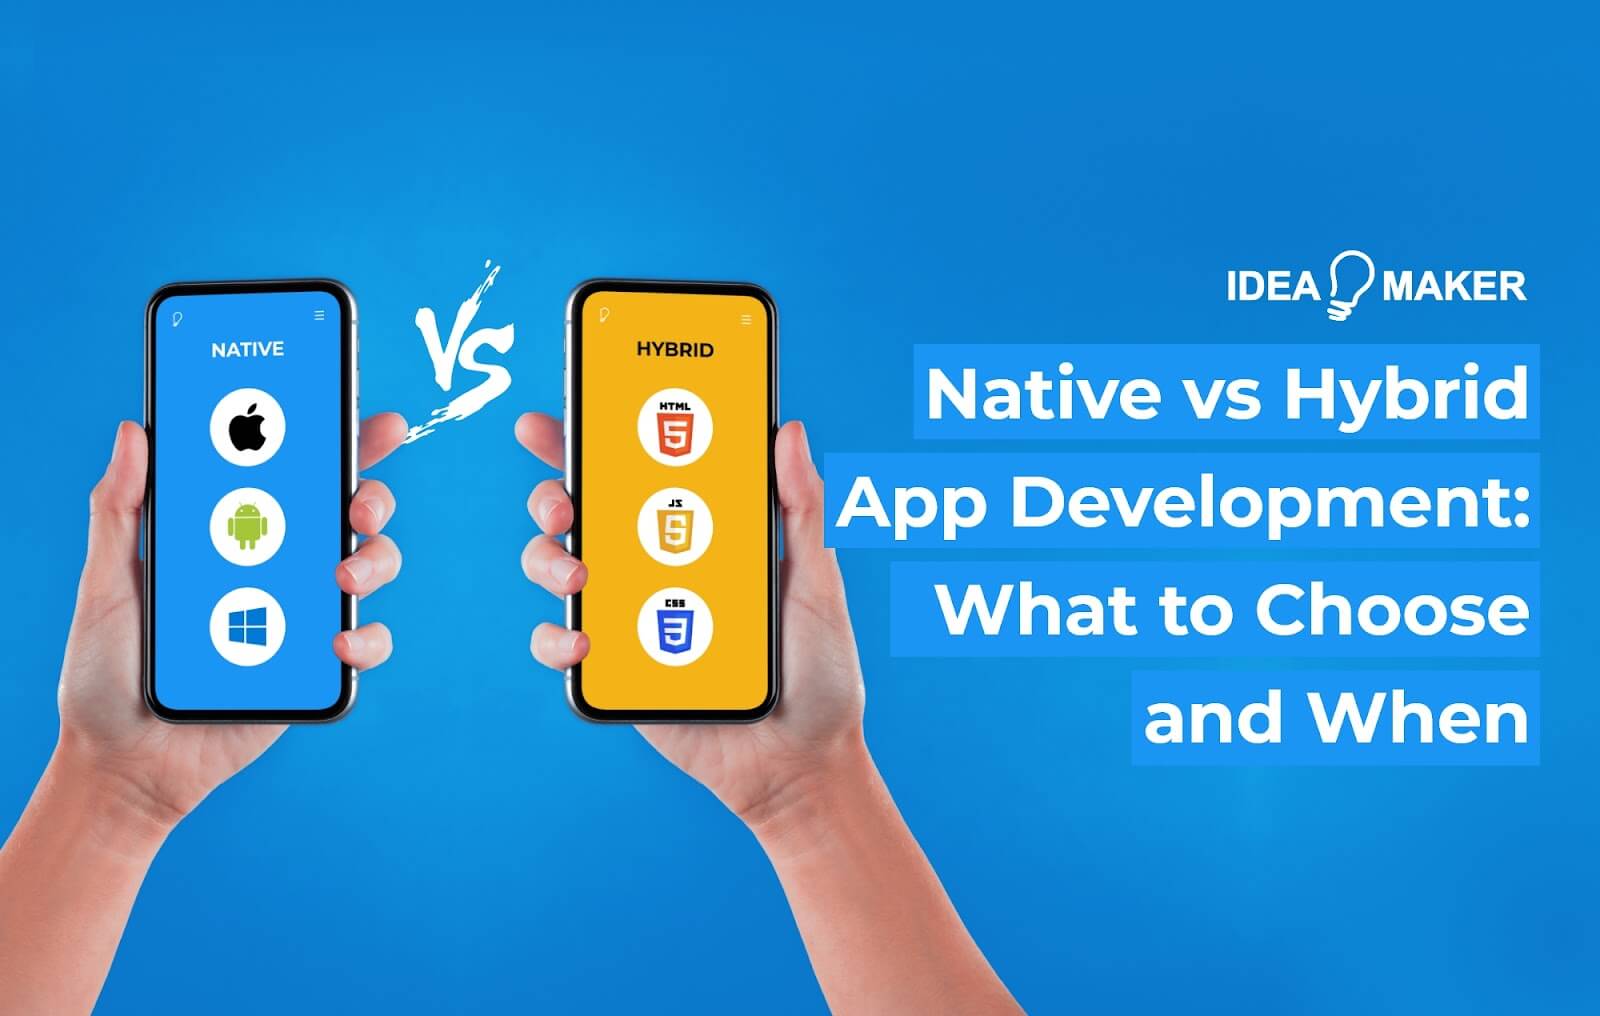 Native vs Hybrid App Development: What to Choose and When